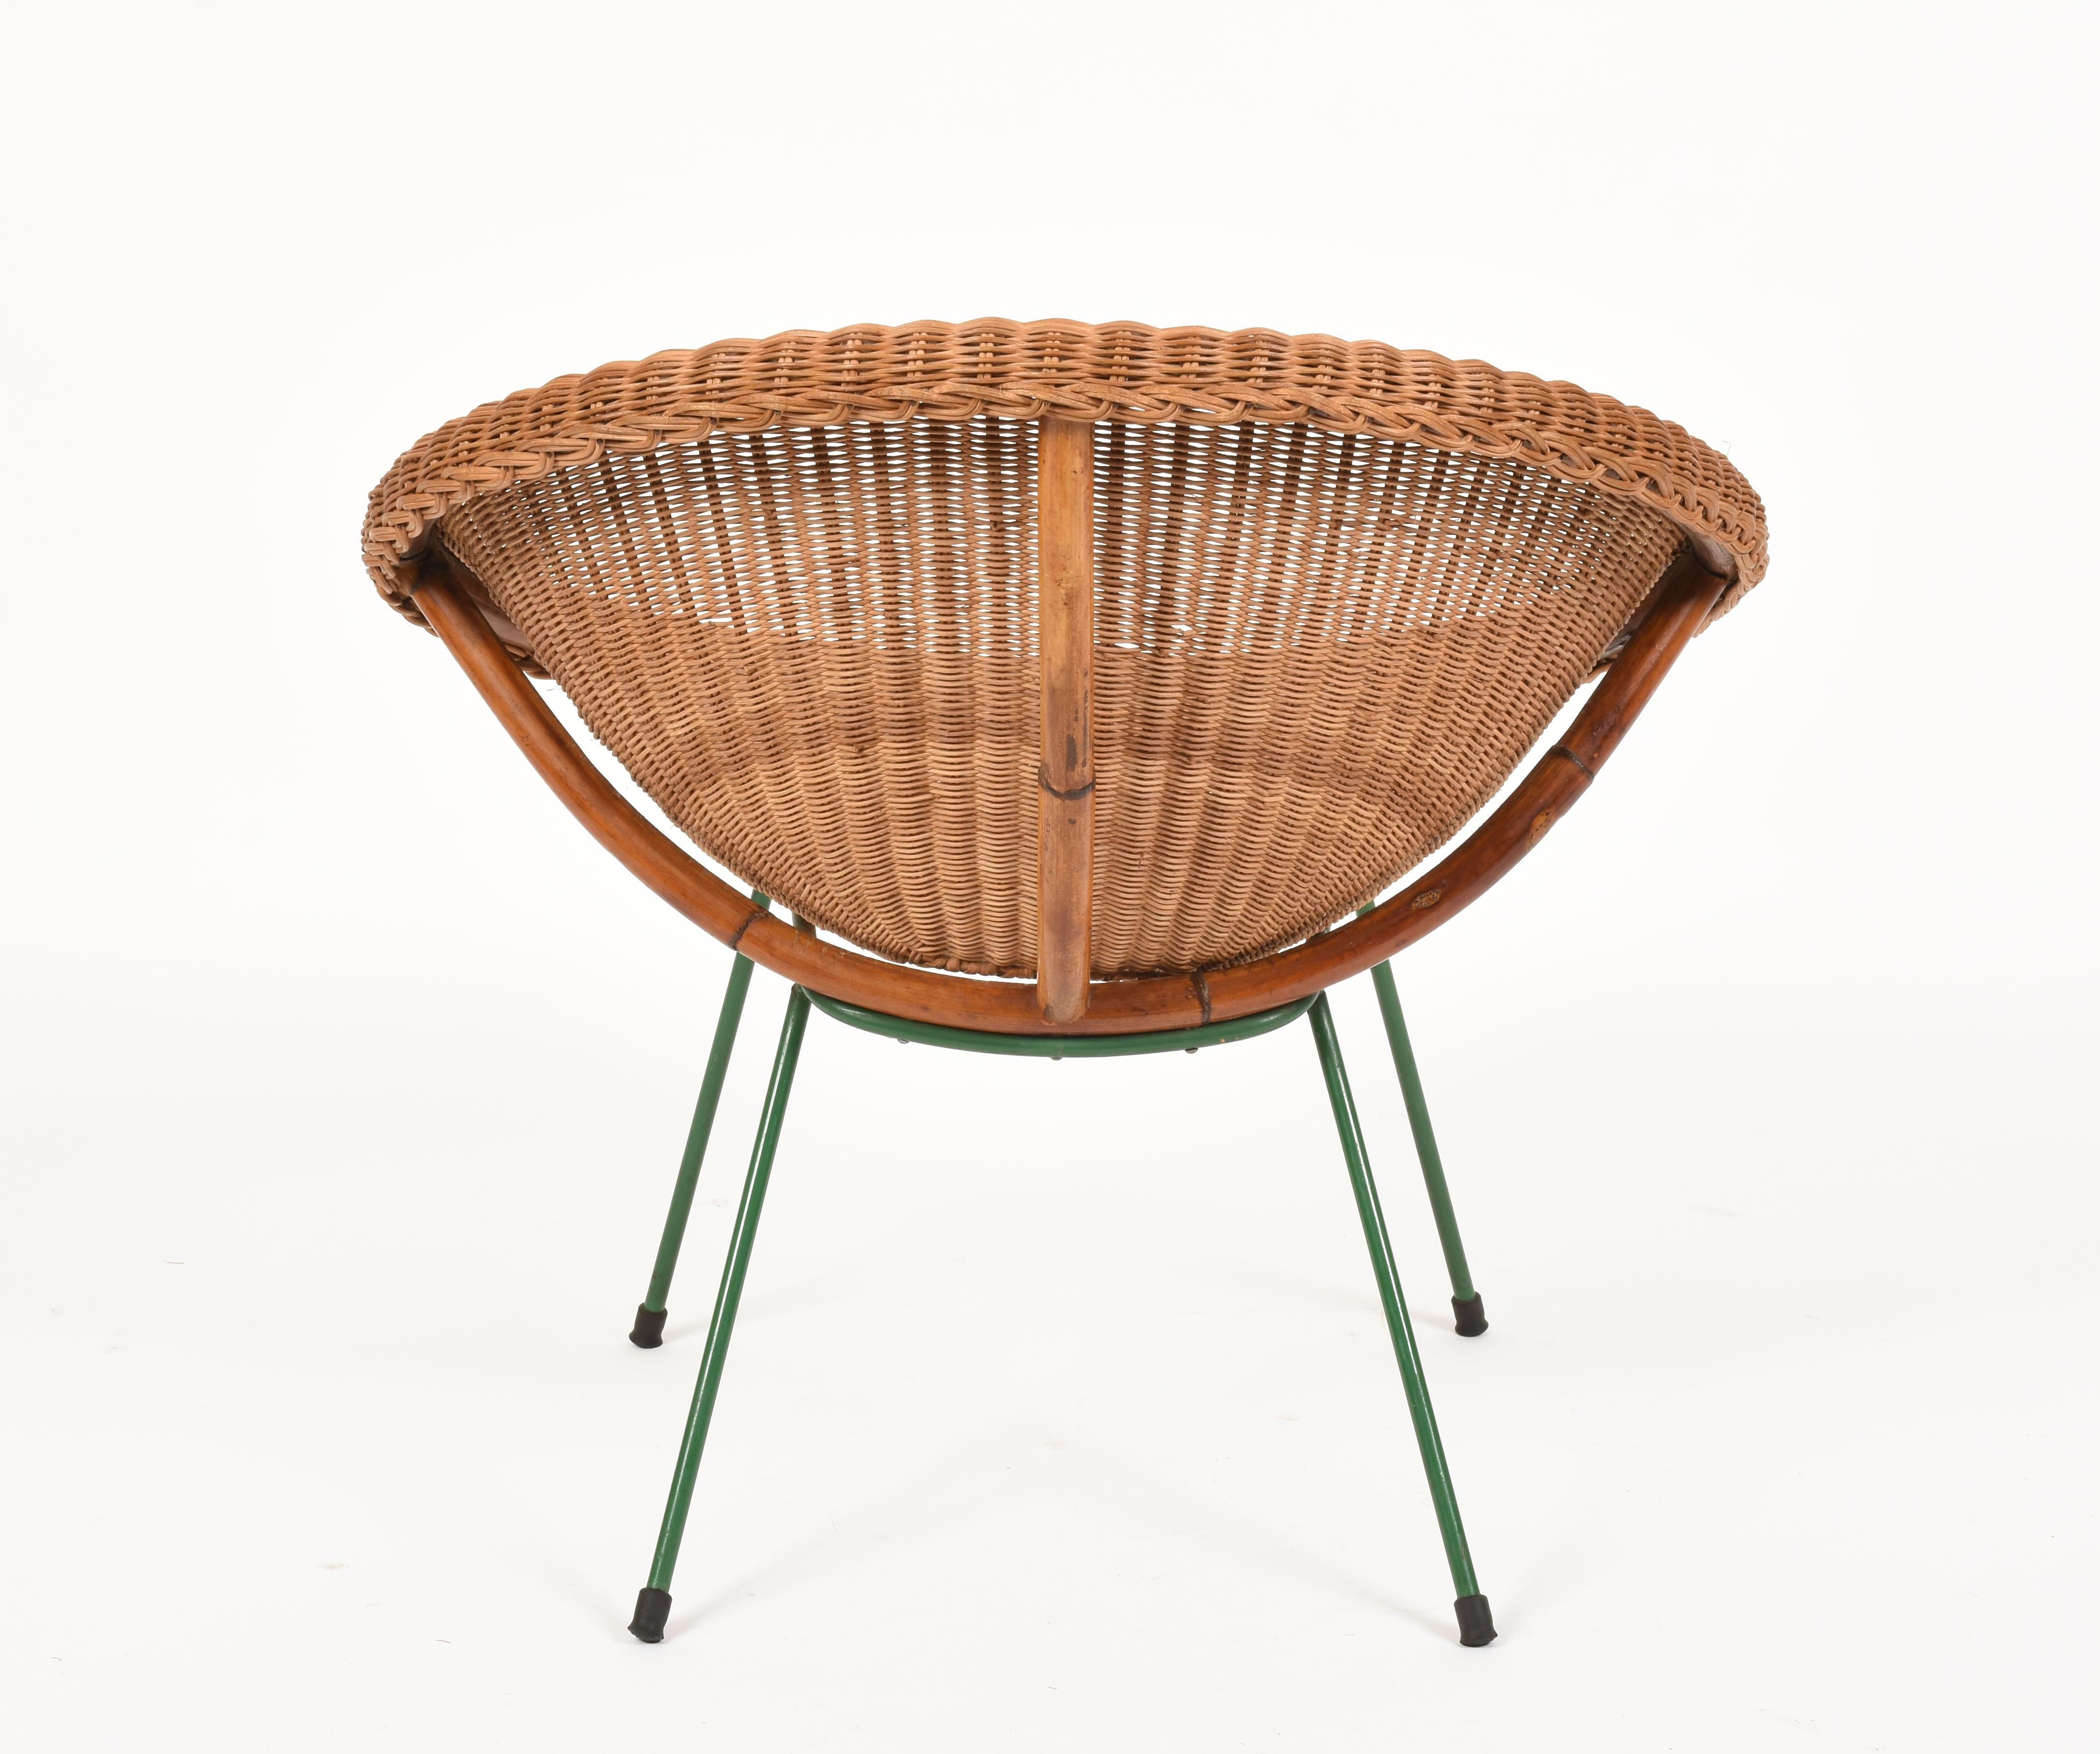 Mid-20th Century Midcentury Italian Rattan and Bamboo Shell Armchair with Green Metal Legs, 1950s